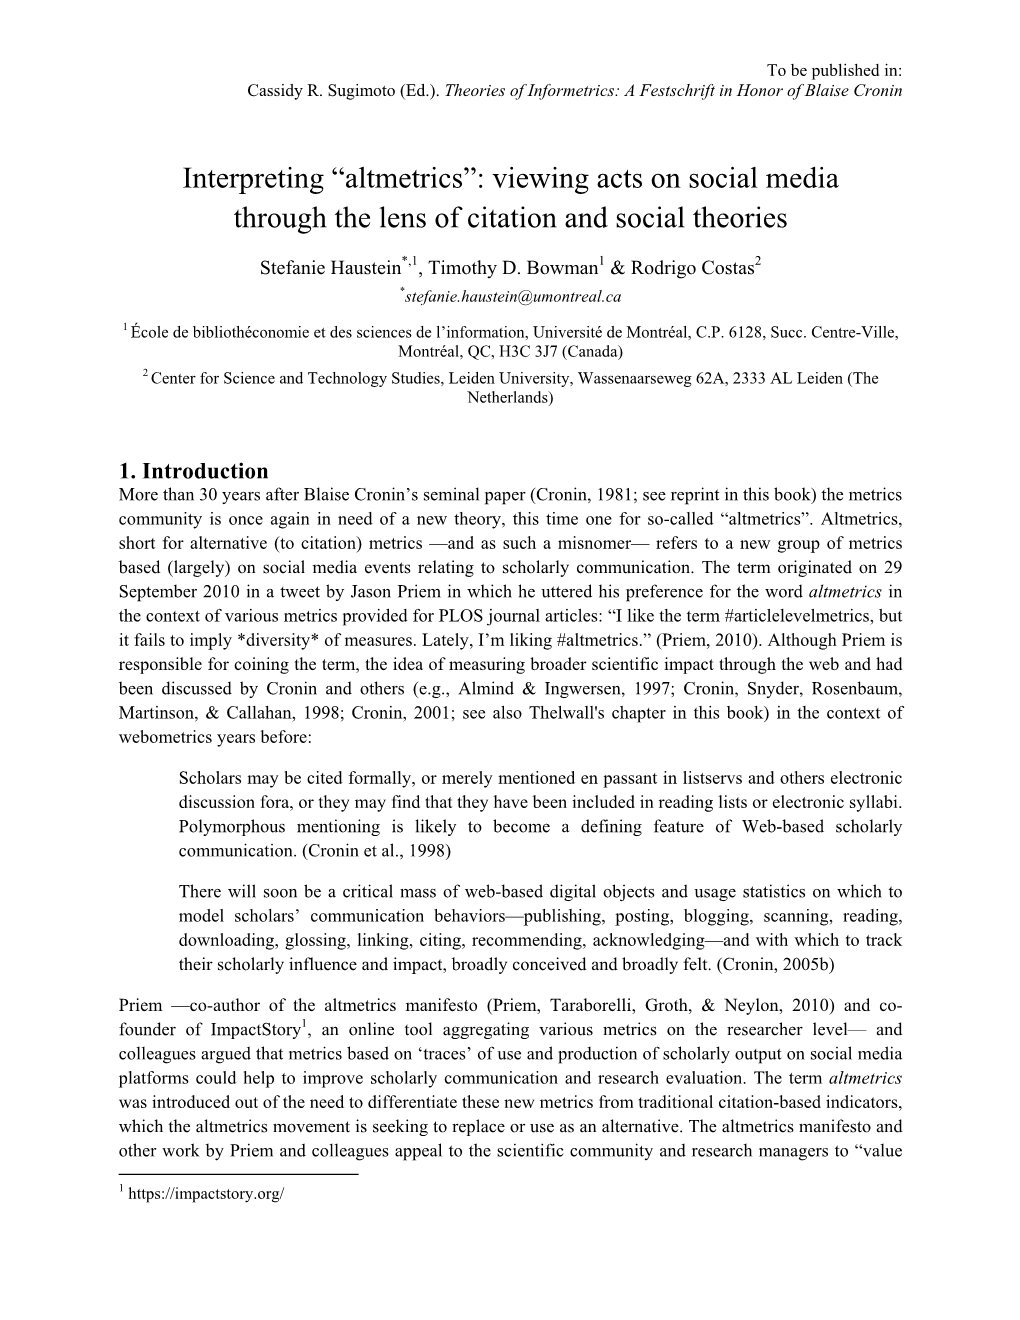 Interpreting “Altmetrics”: Viewing Acts on Social Media Through the Lens of Citation and Social Theories